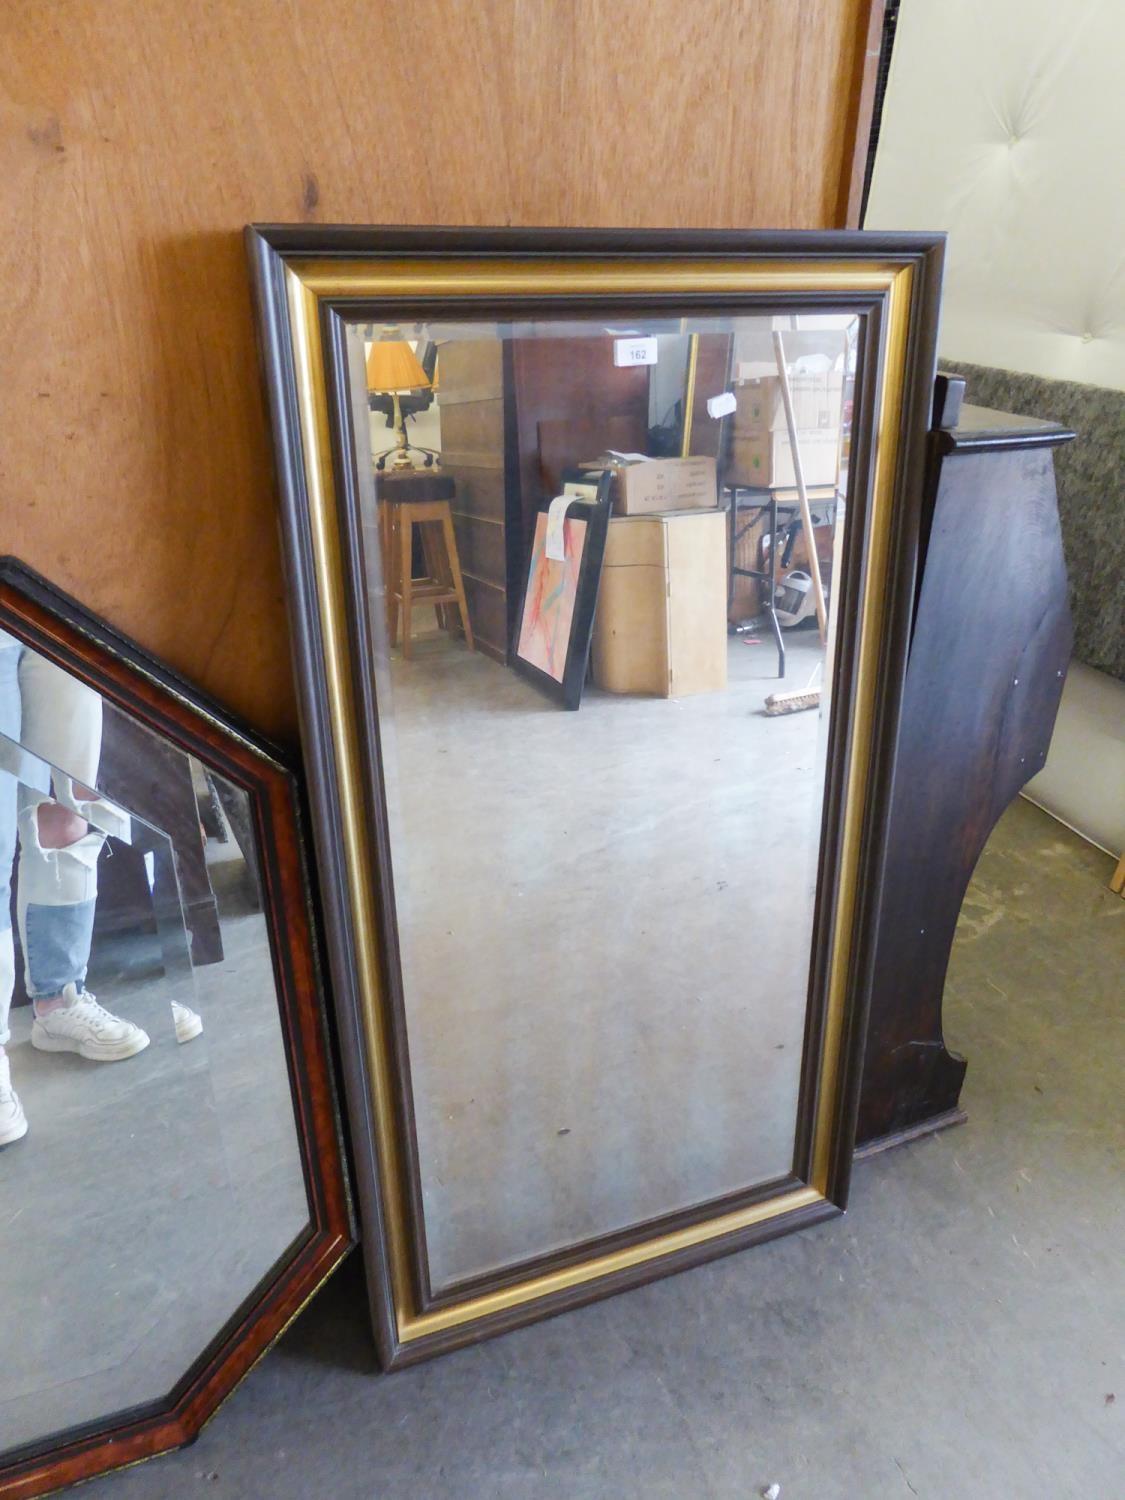 AN OBLONG BEVELLED EDGE WALL MIRROR, IN BROWN AND GILT FRAME, 2?1? X 3?11? OVERALL